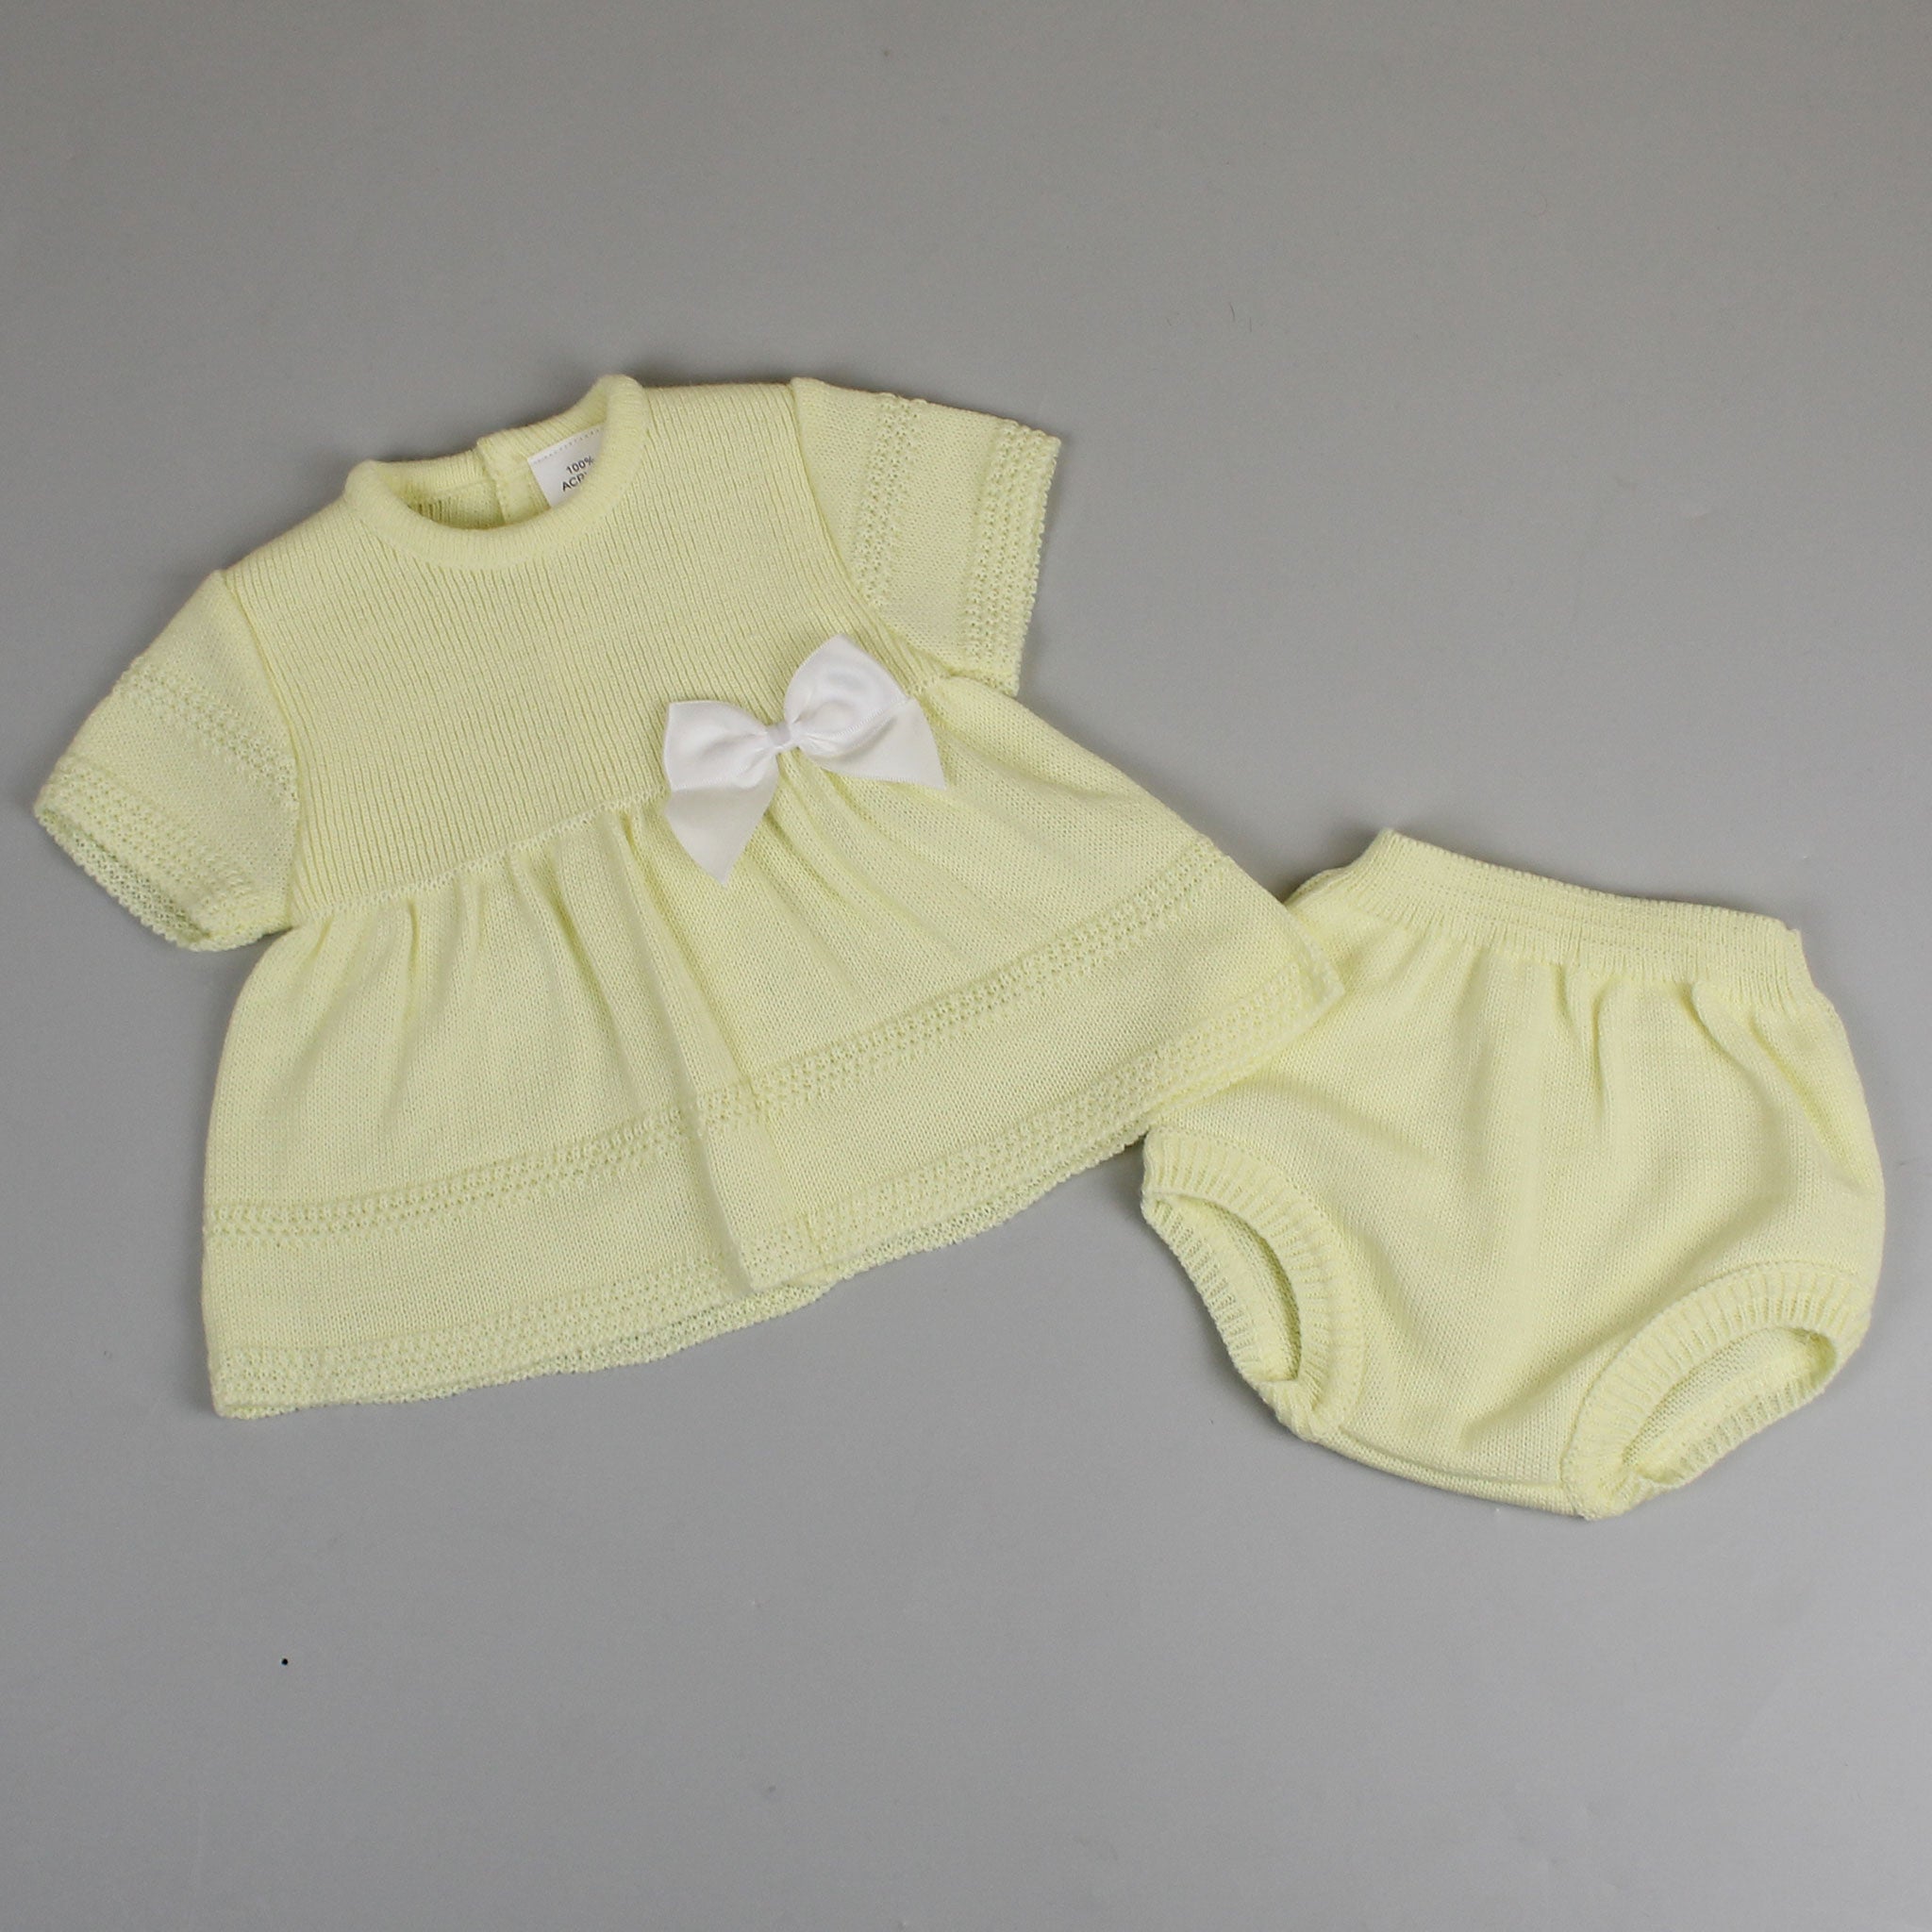 lemon yellow knitted baby dress and knickers